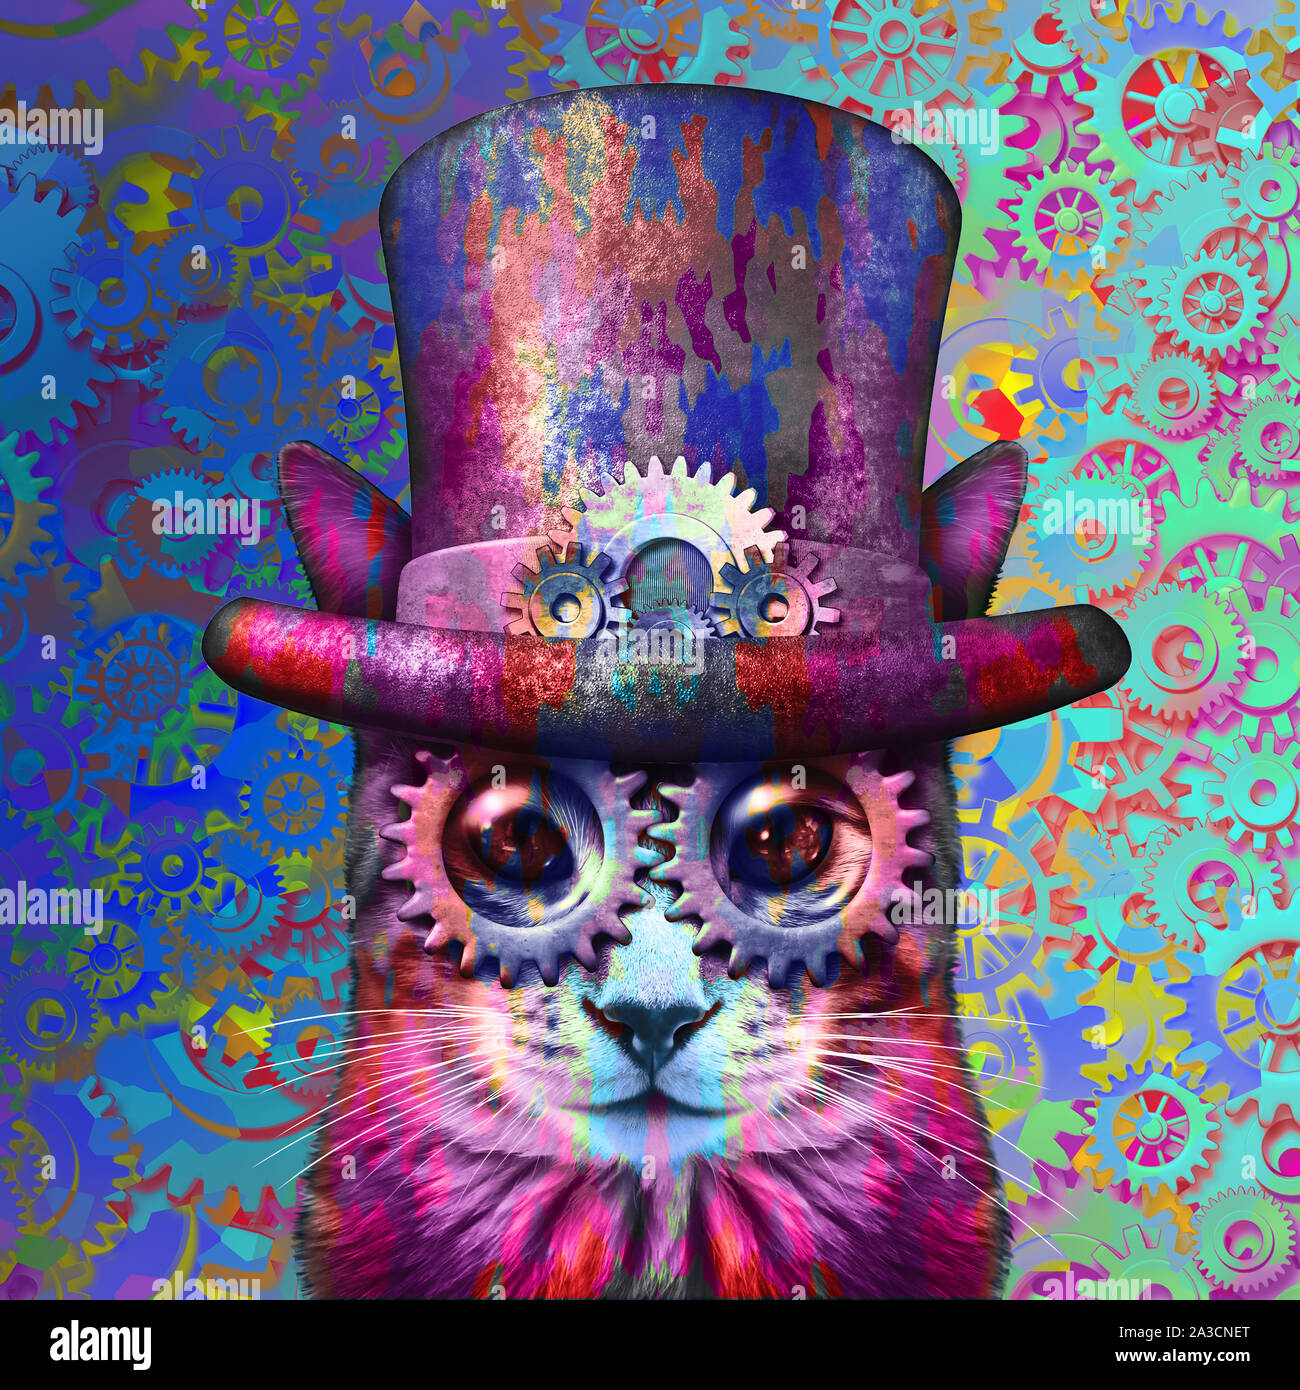 Steampunk cat psychedelic art and steam punk grunge kitten with 3D illustration elements. Stock Photo